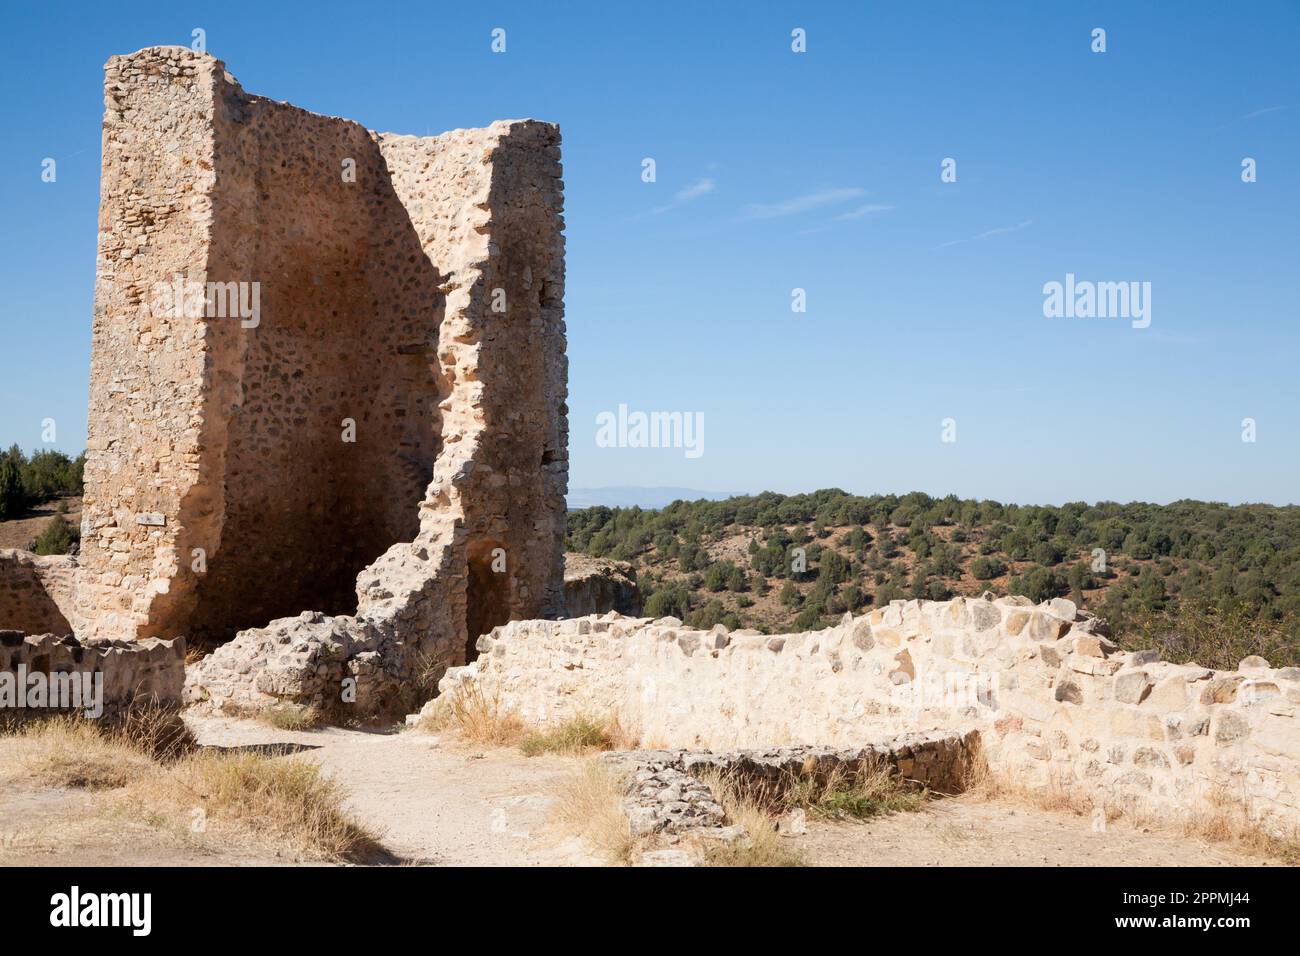 View of the ruins of the castle of Calatanazor, Spain Stock Photo